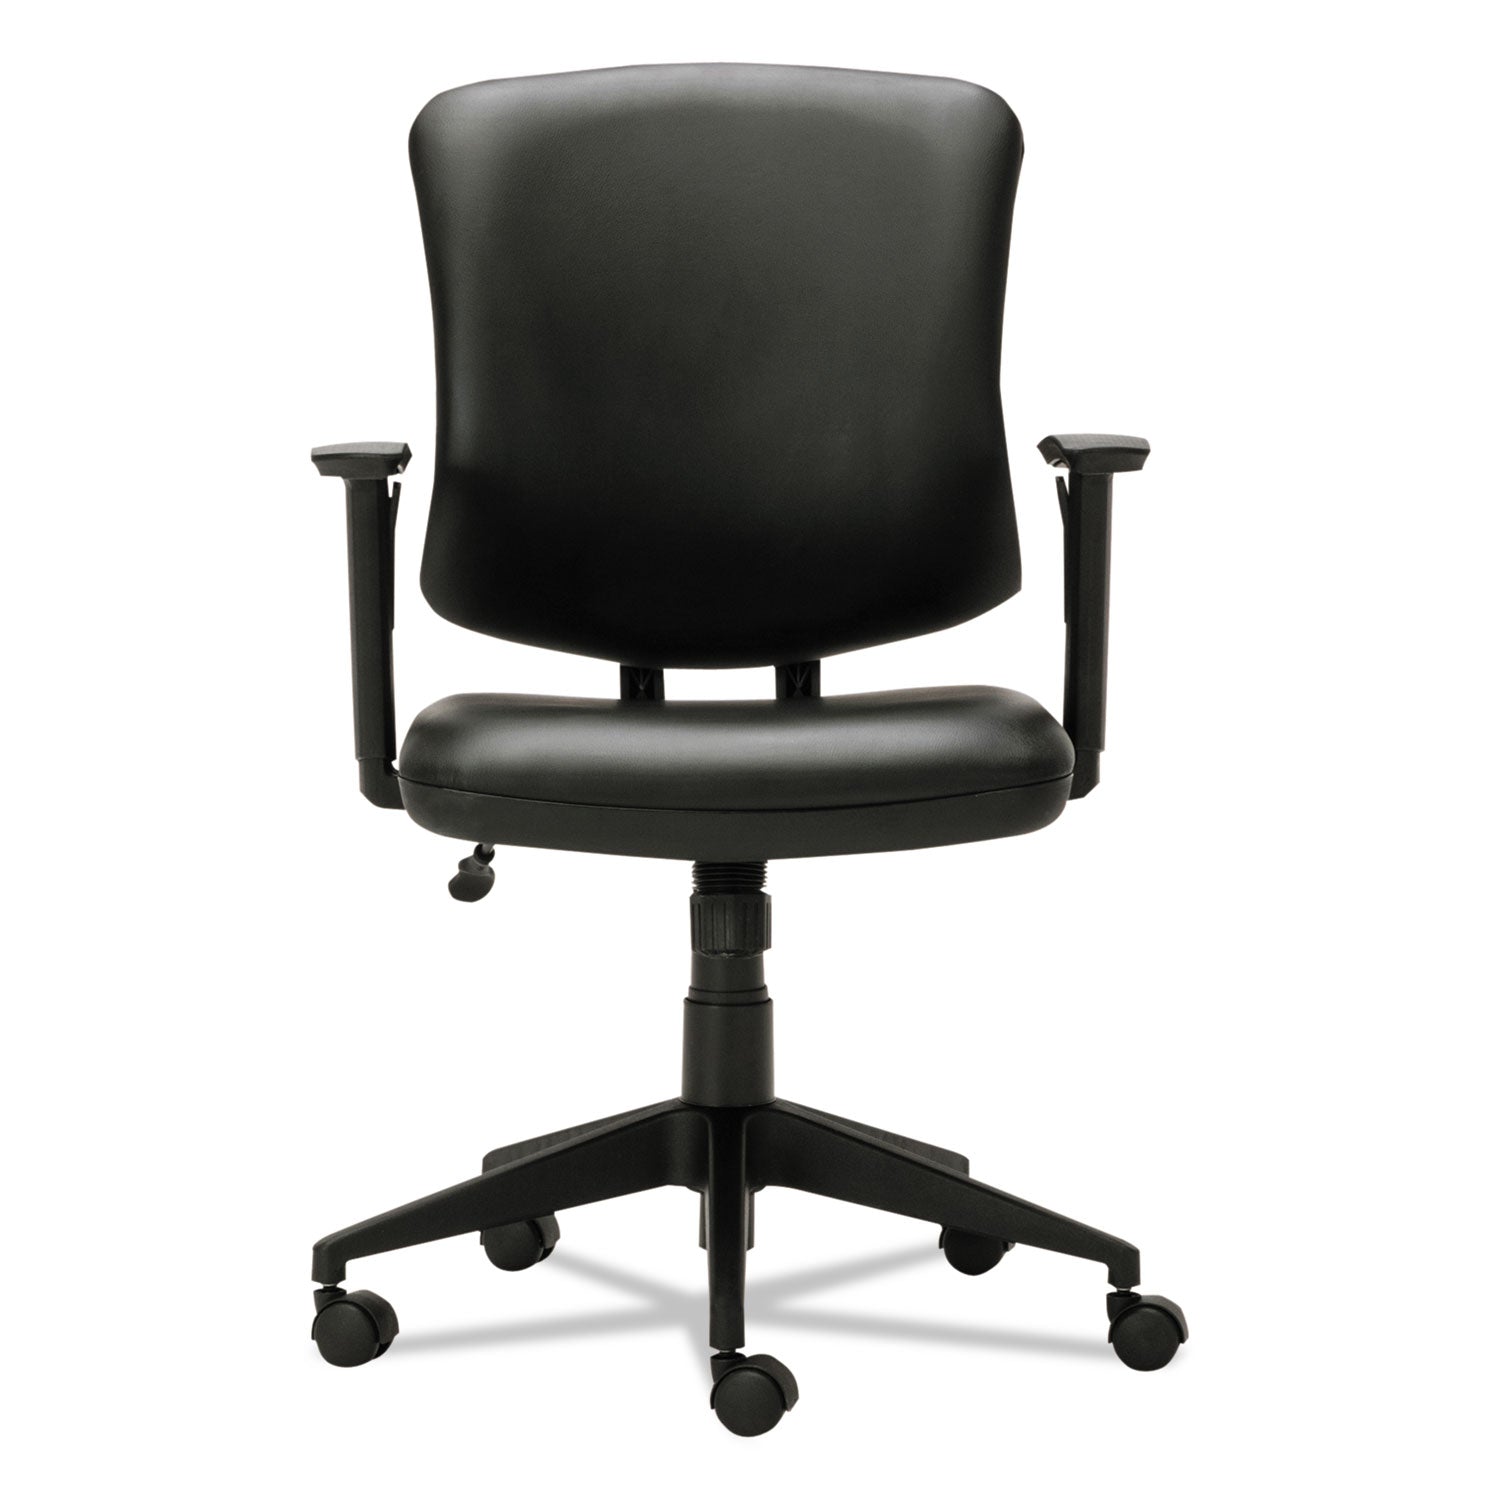 alera-everyday-task-office-chair-bonded-leather-seat-back-supports-up-to-275-lb-176-to-215-seat-height-black_alete4819 - 2